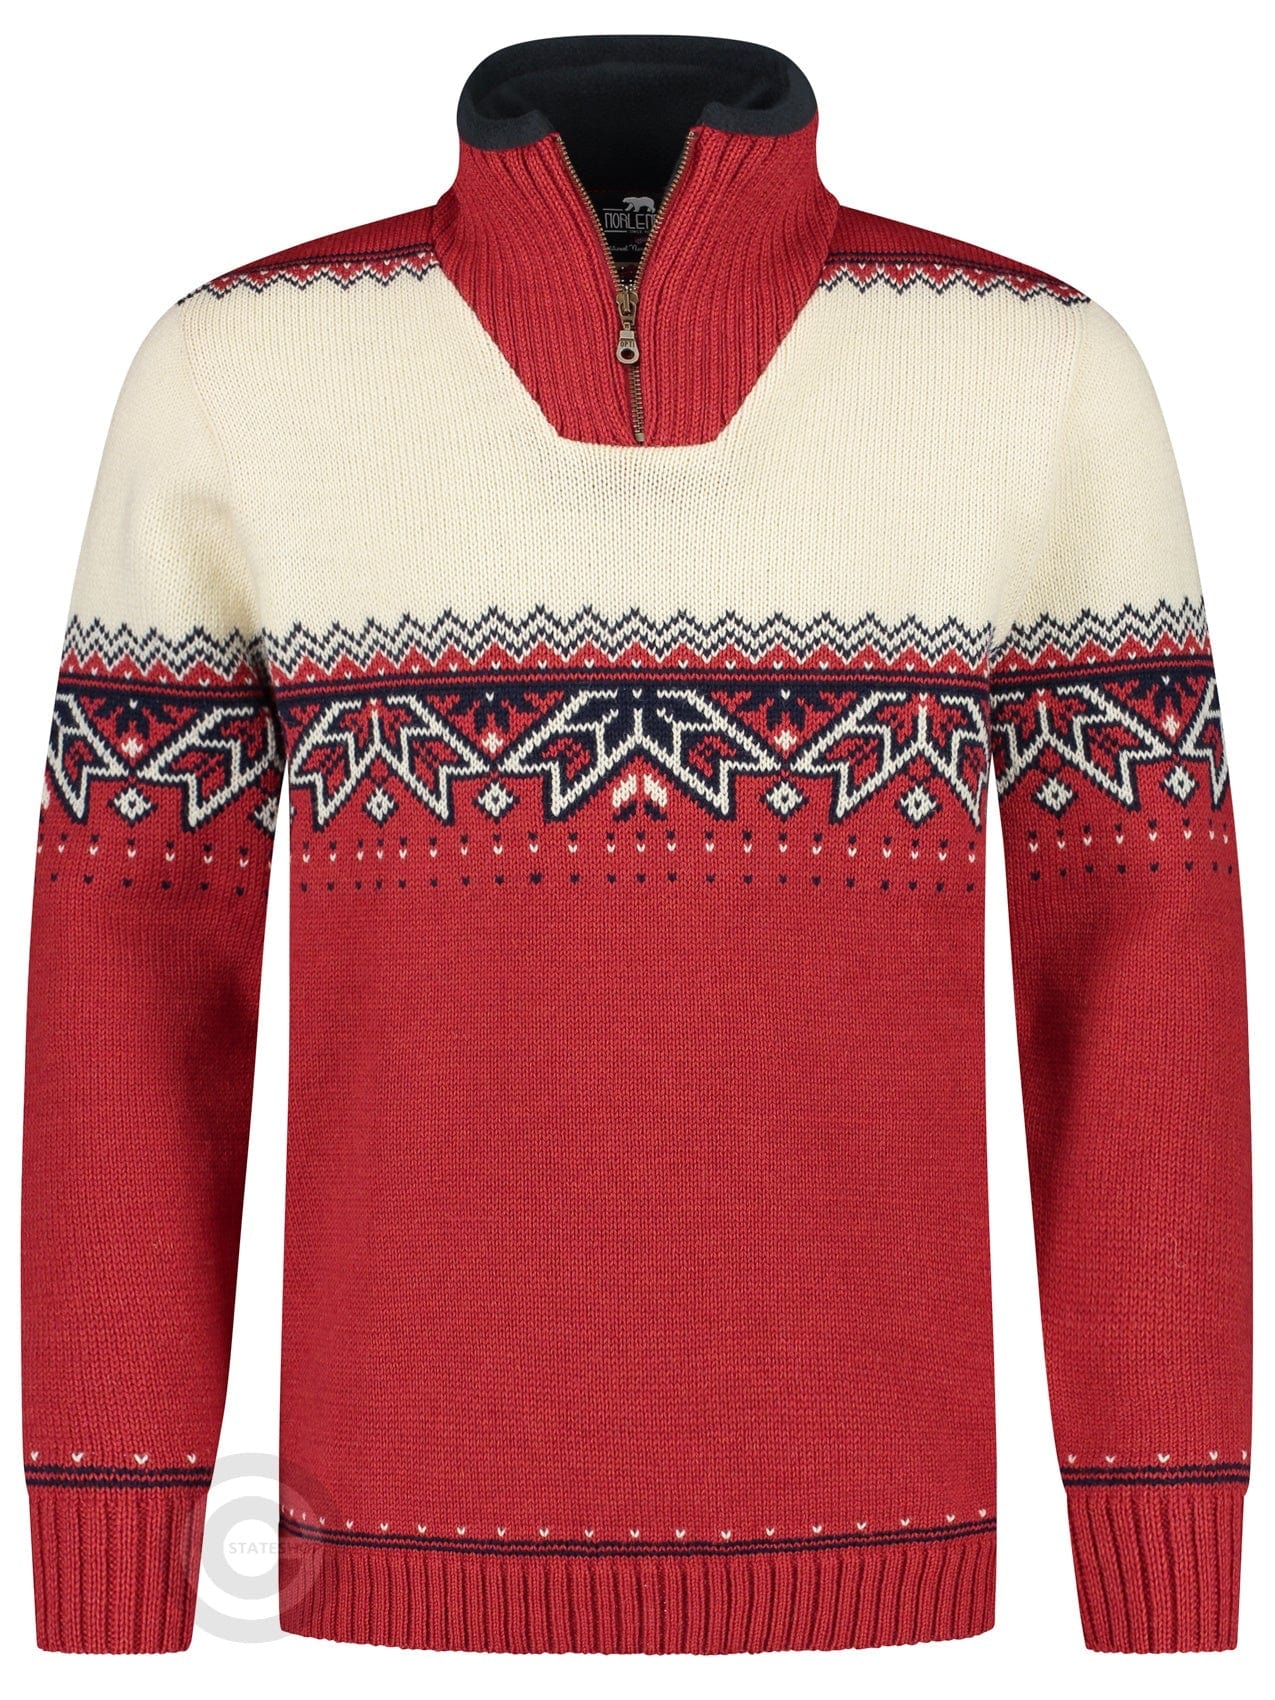 Nordic sweater with traditional star pattern, redNorfinde